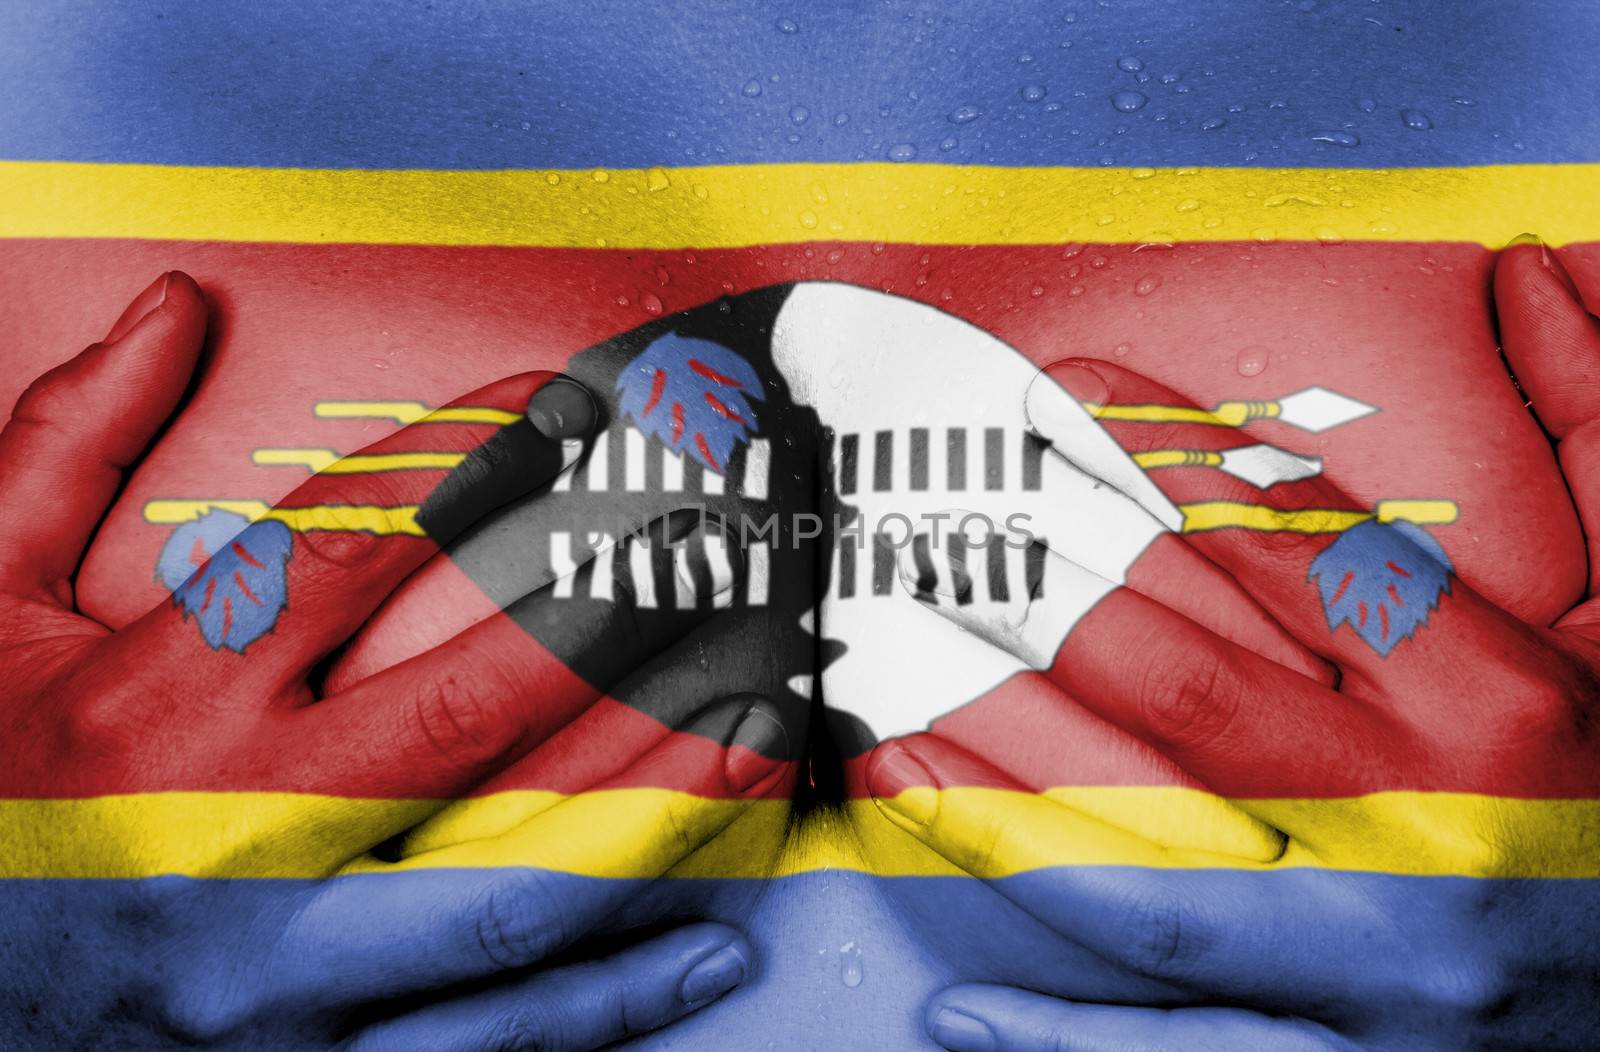 Sweaty upper part of female body, hands covering breasts, flag of Swaziland